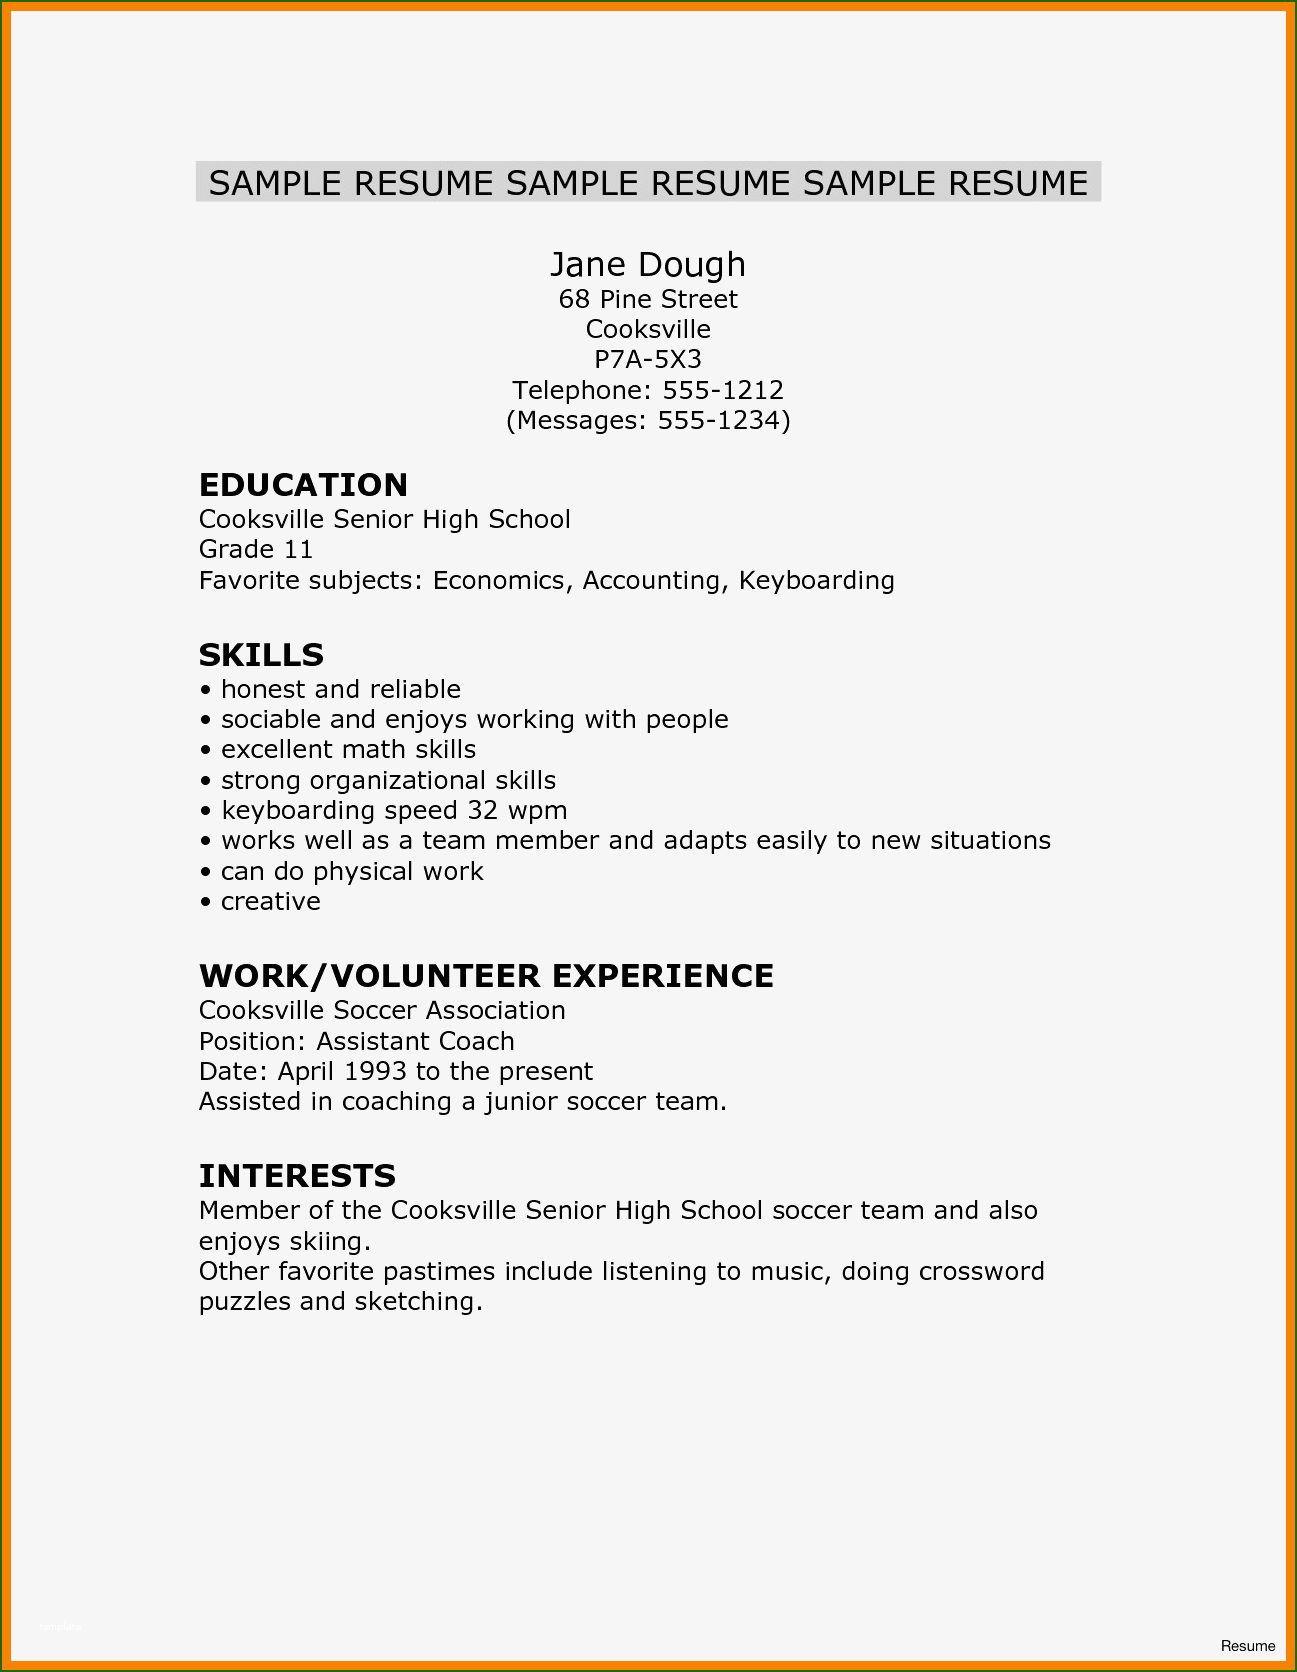 Sample Resume for High School Student Looking for A Job 7 Ideal Free High School Resume Template for 2020 High School …